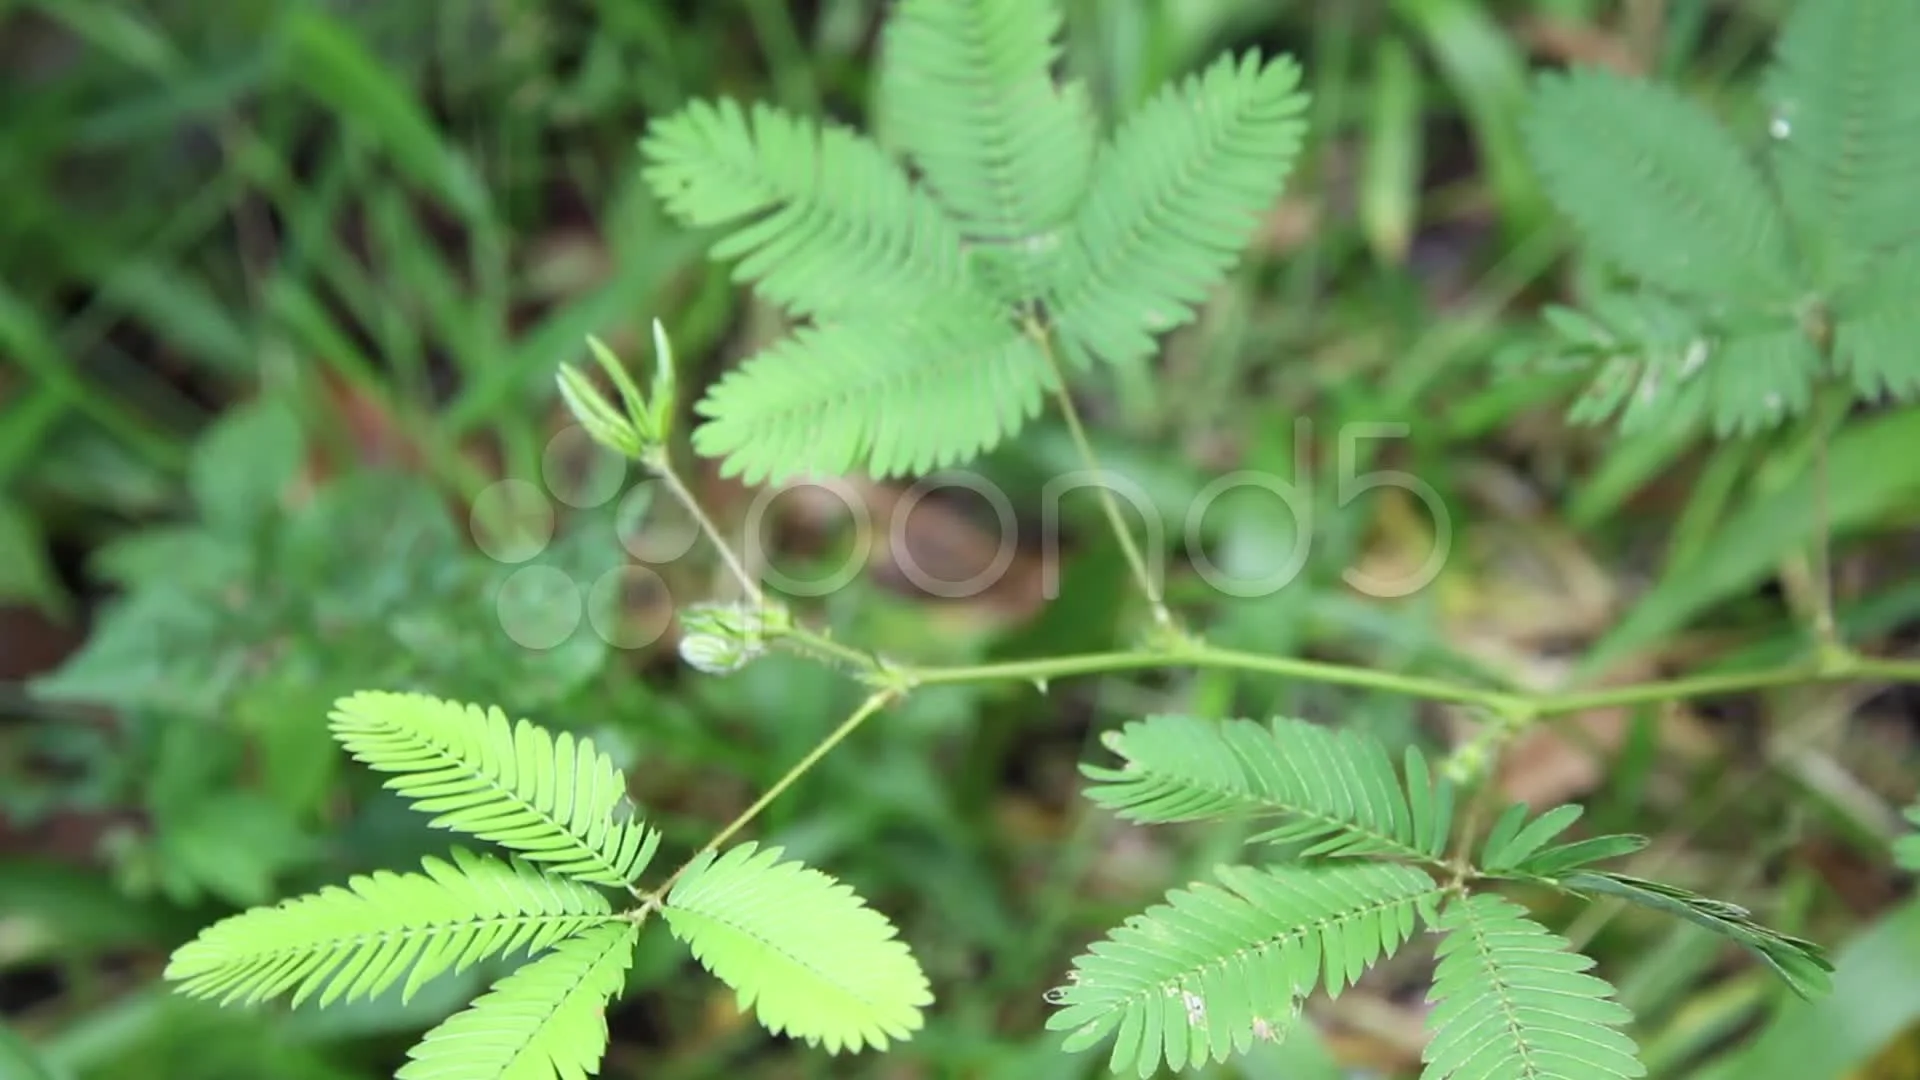 how did the touch me not or sensitive plant get its name and how does it close its leaves when you touch it